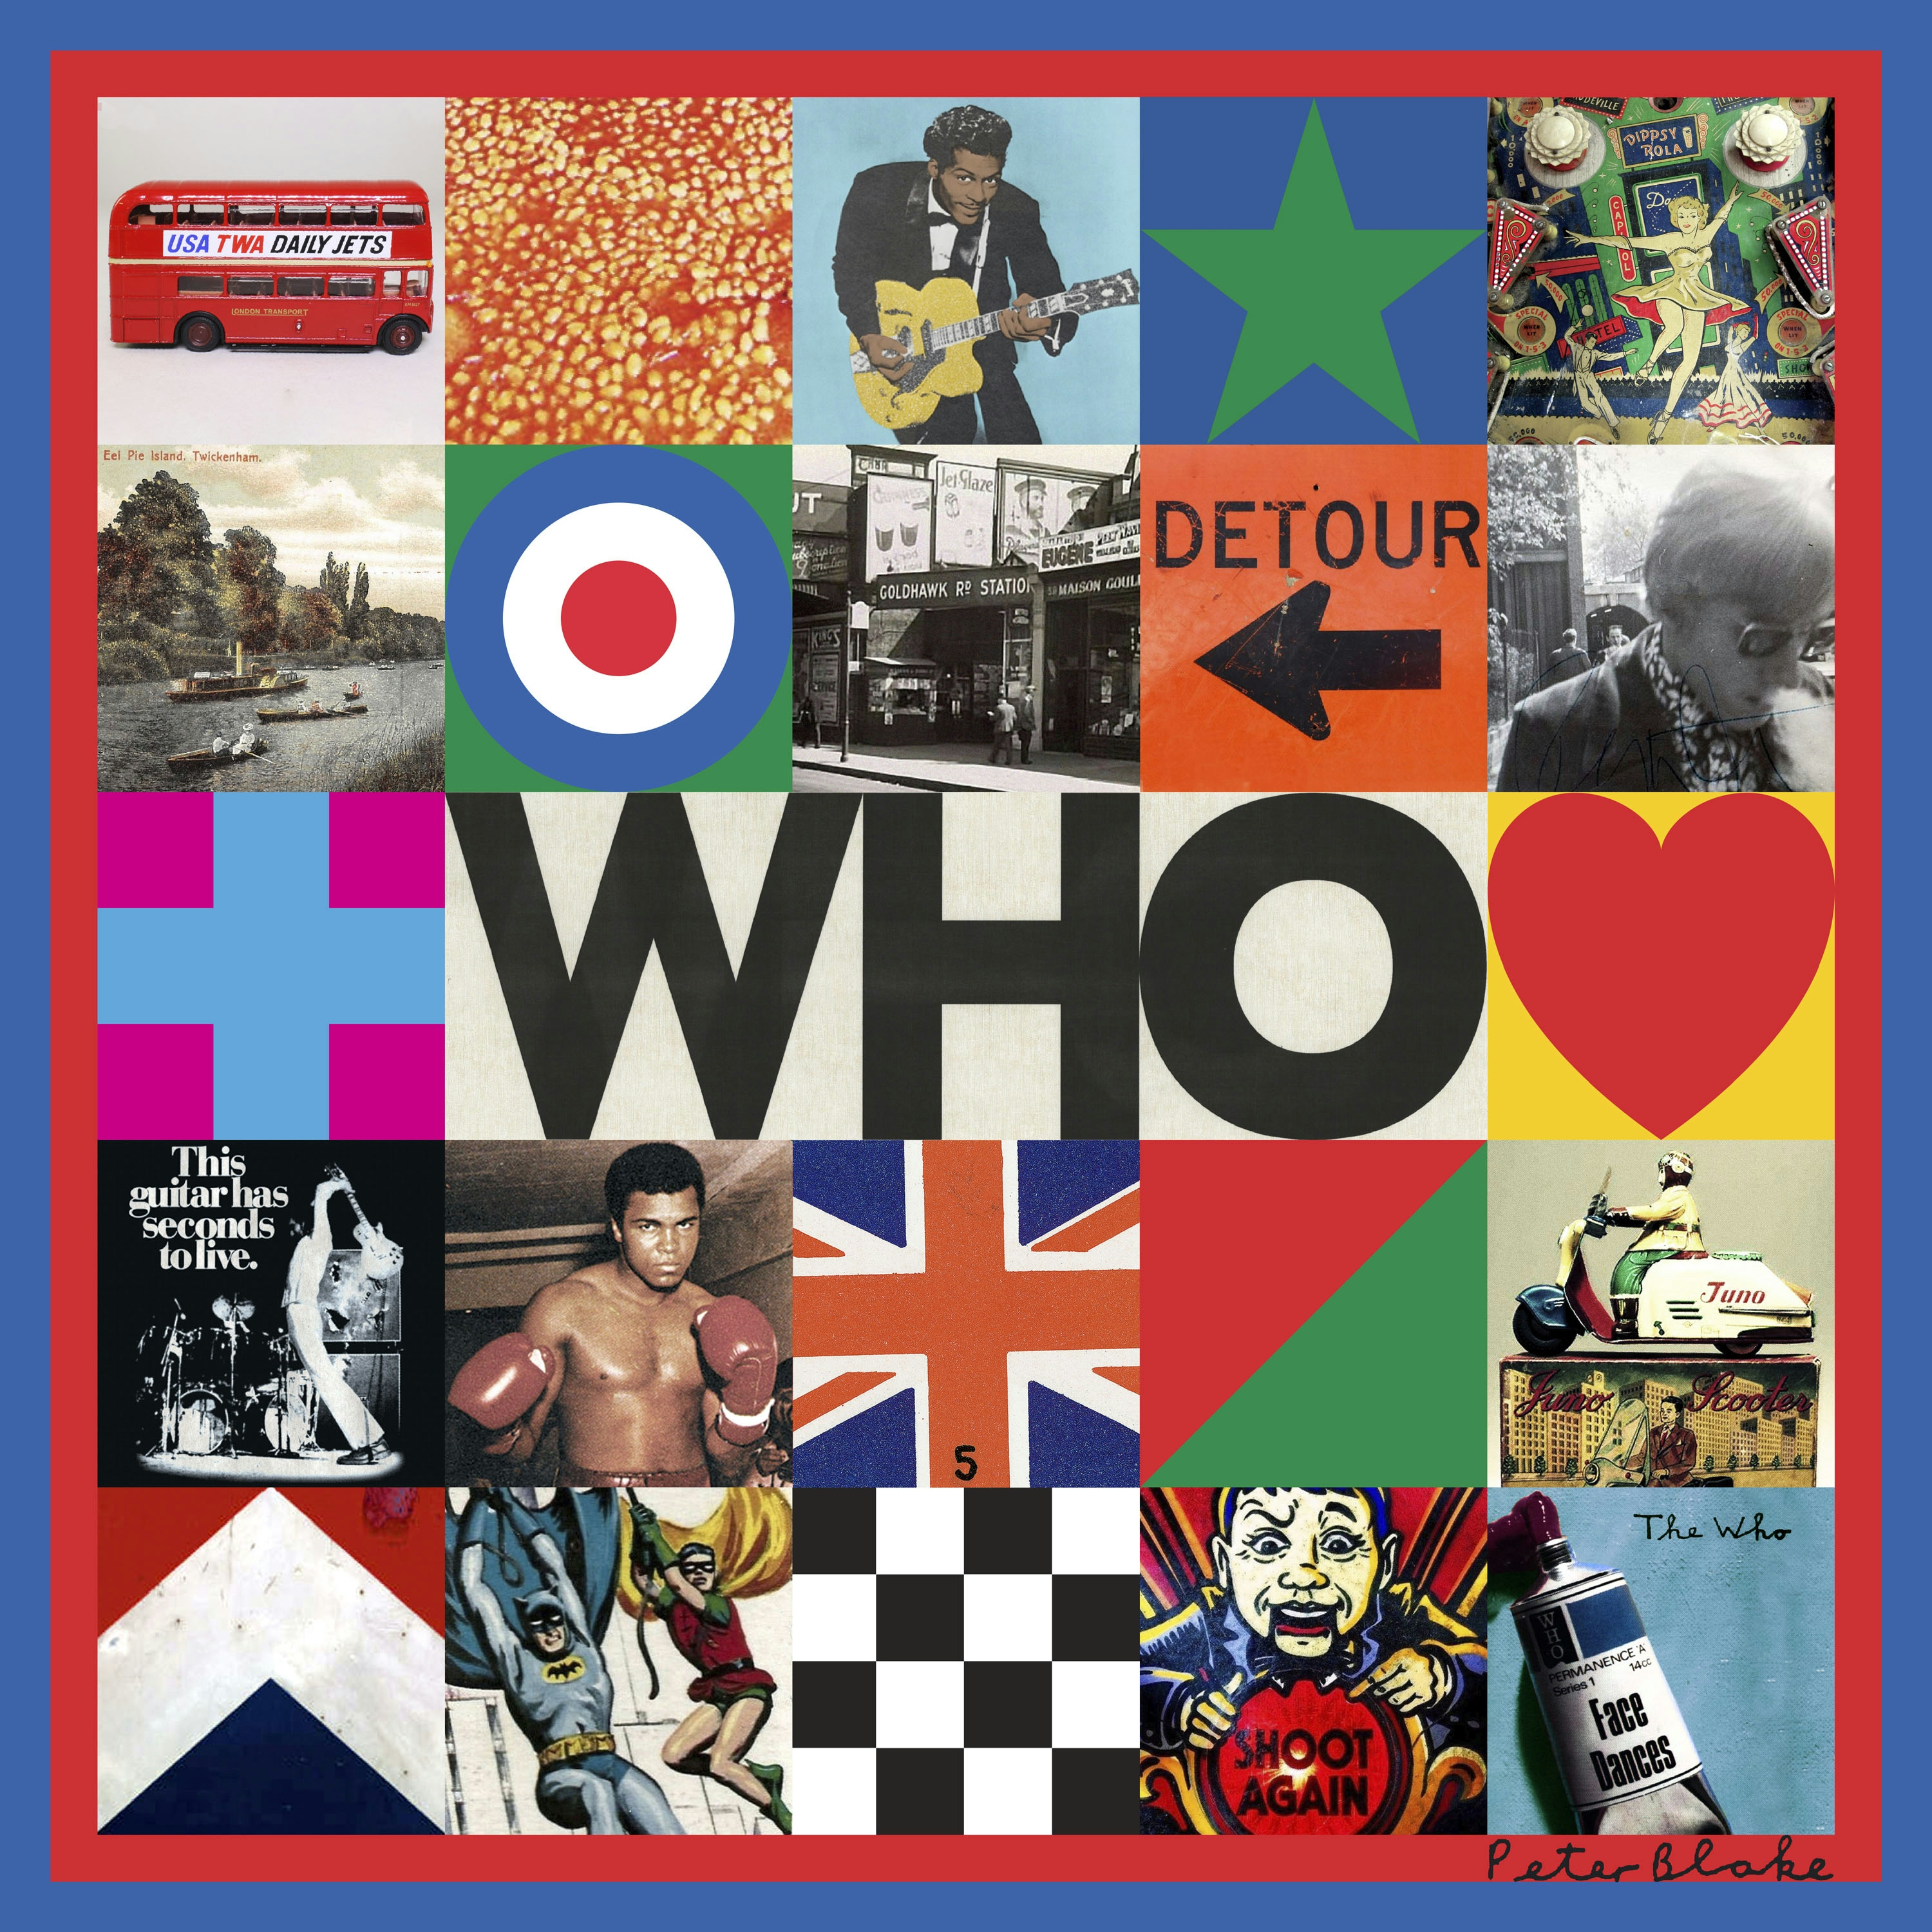 Album artwork for Album artwork for WHO by The Who by WHO - The Who